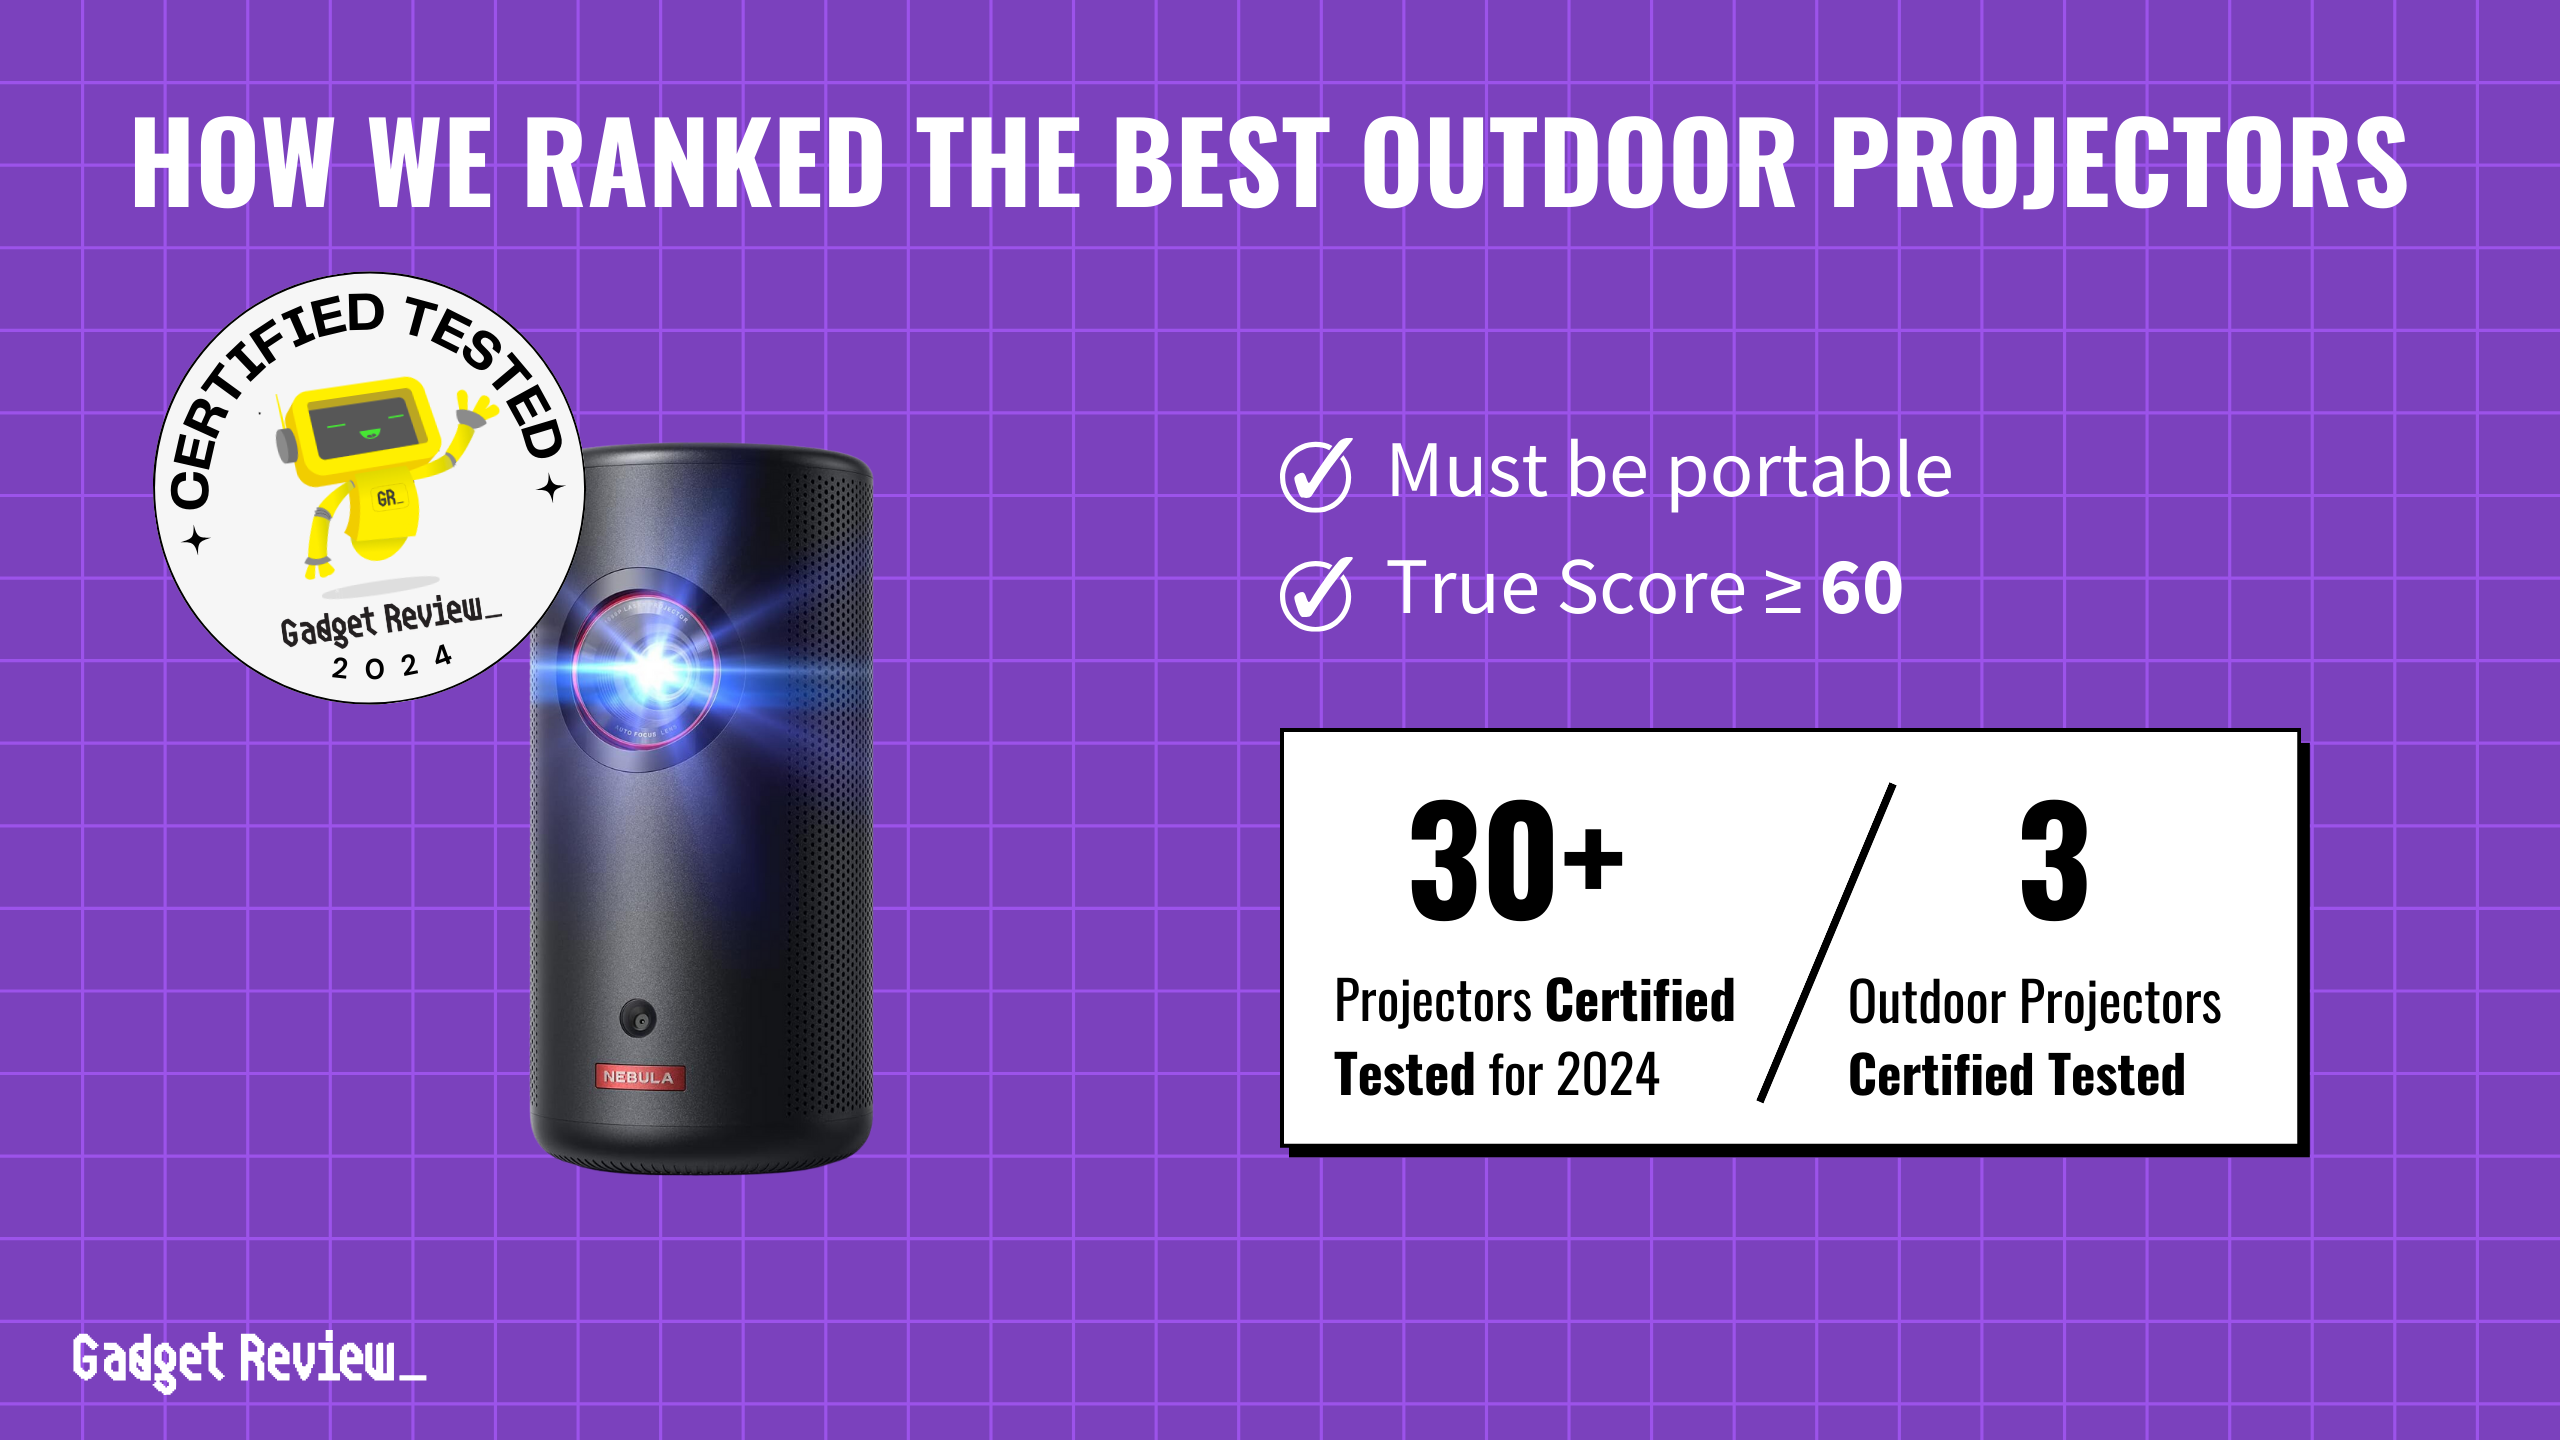 What are the Top 3 Outdoor Projectors?